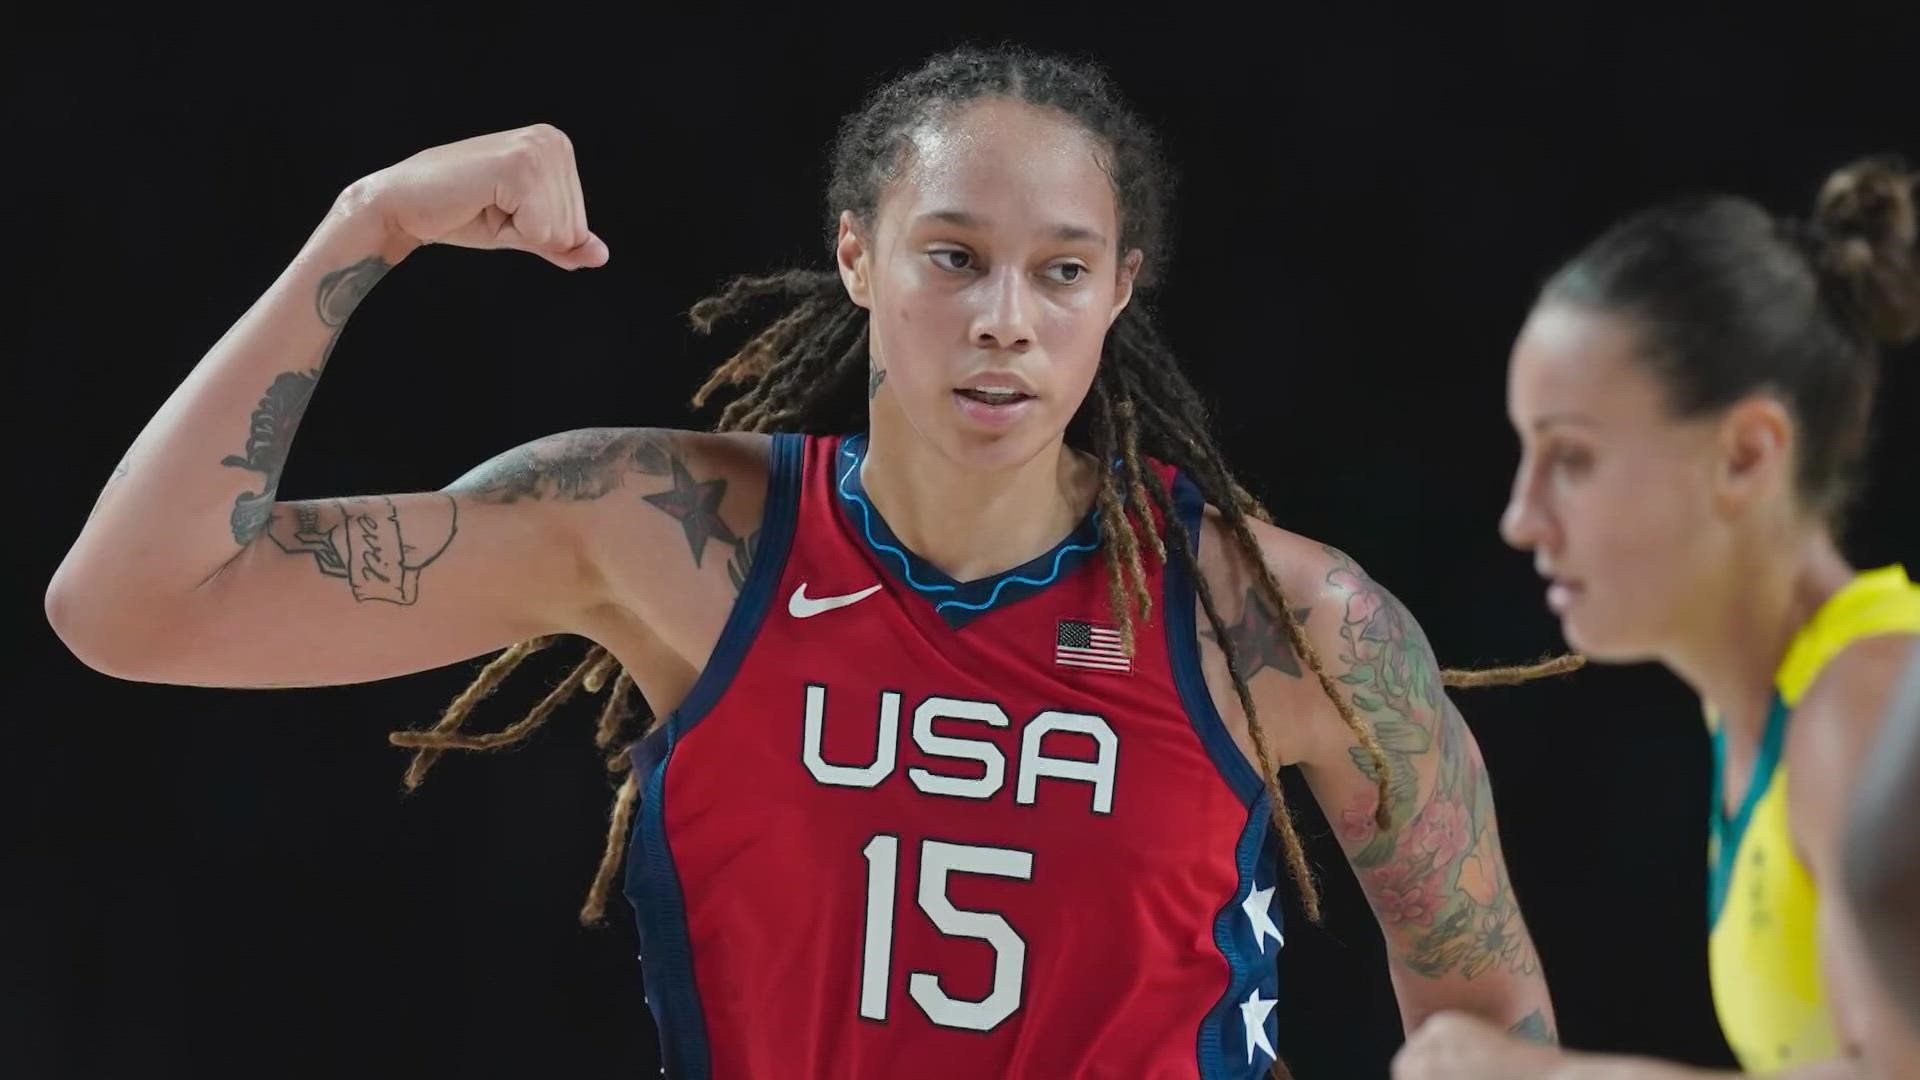 "I was hoping and praying for something to be resolved, but it doesn't look that's going to be the case," said Griner's former high school coach.